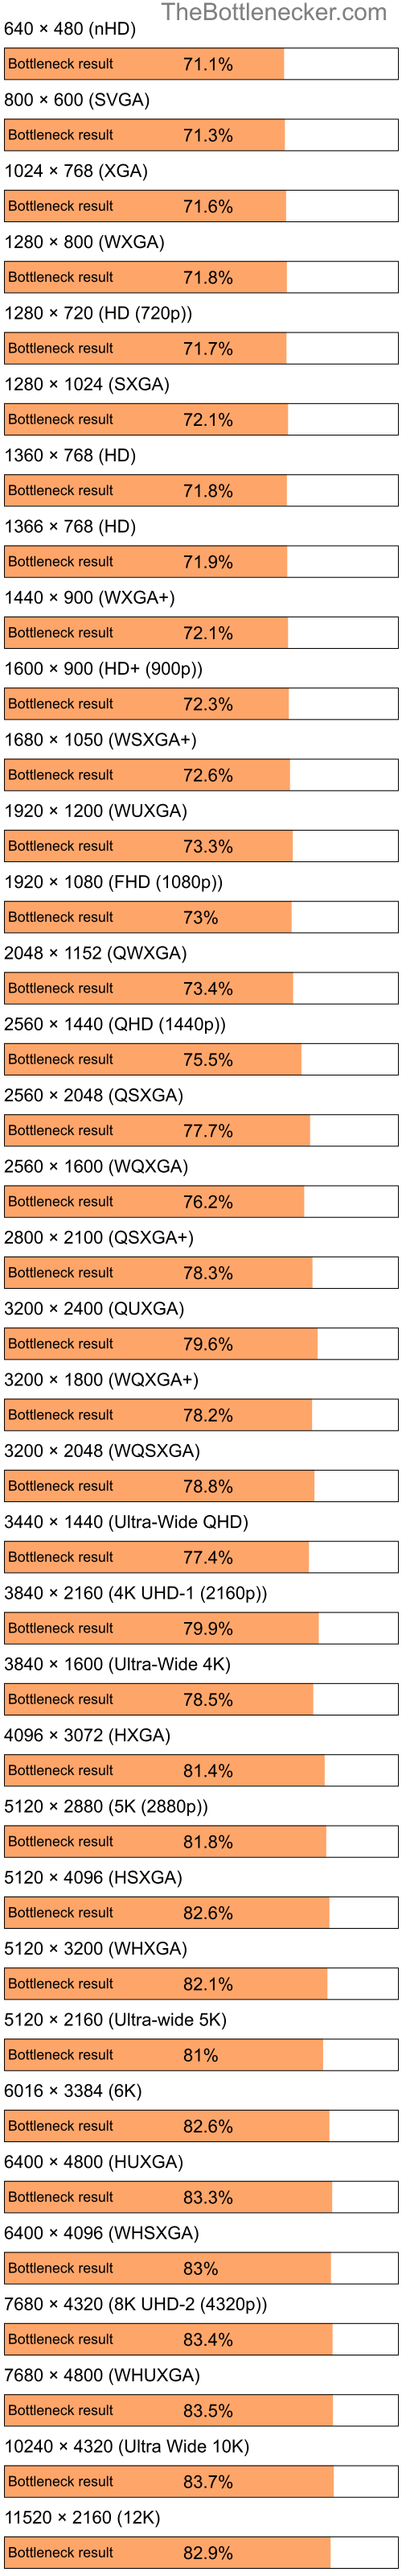 Bottleneck results by resolution for Intel Pentium 4 and AMD Mobility Radeon HD 2300 in General Tasks